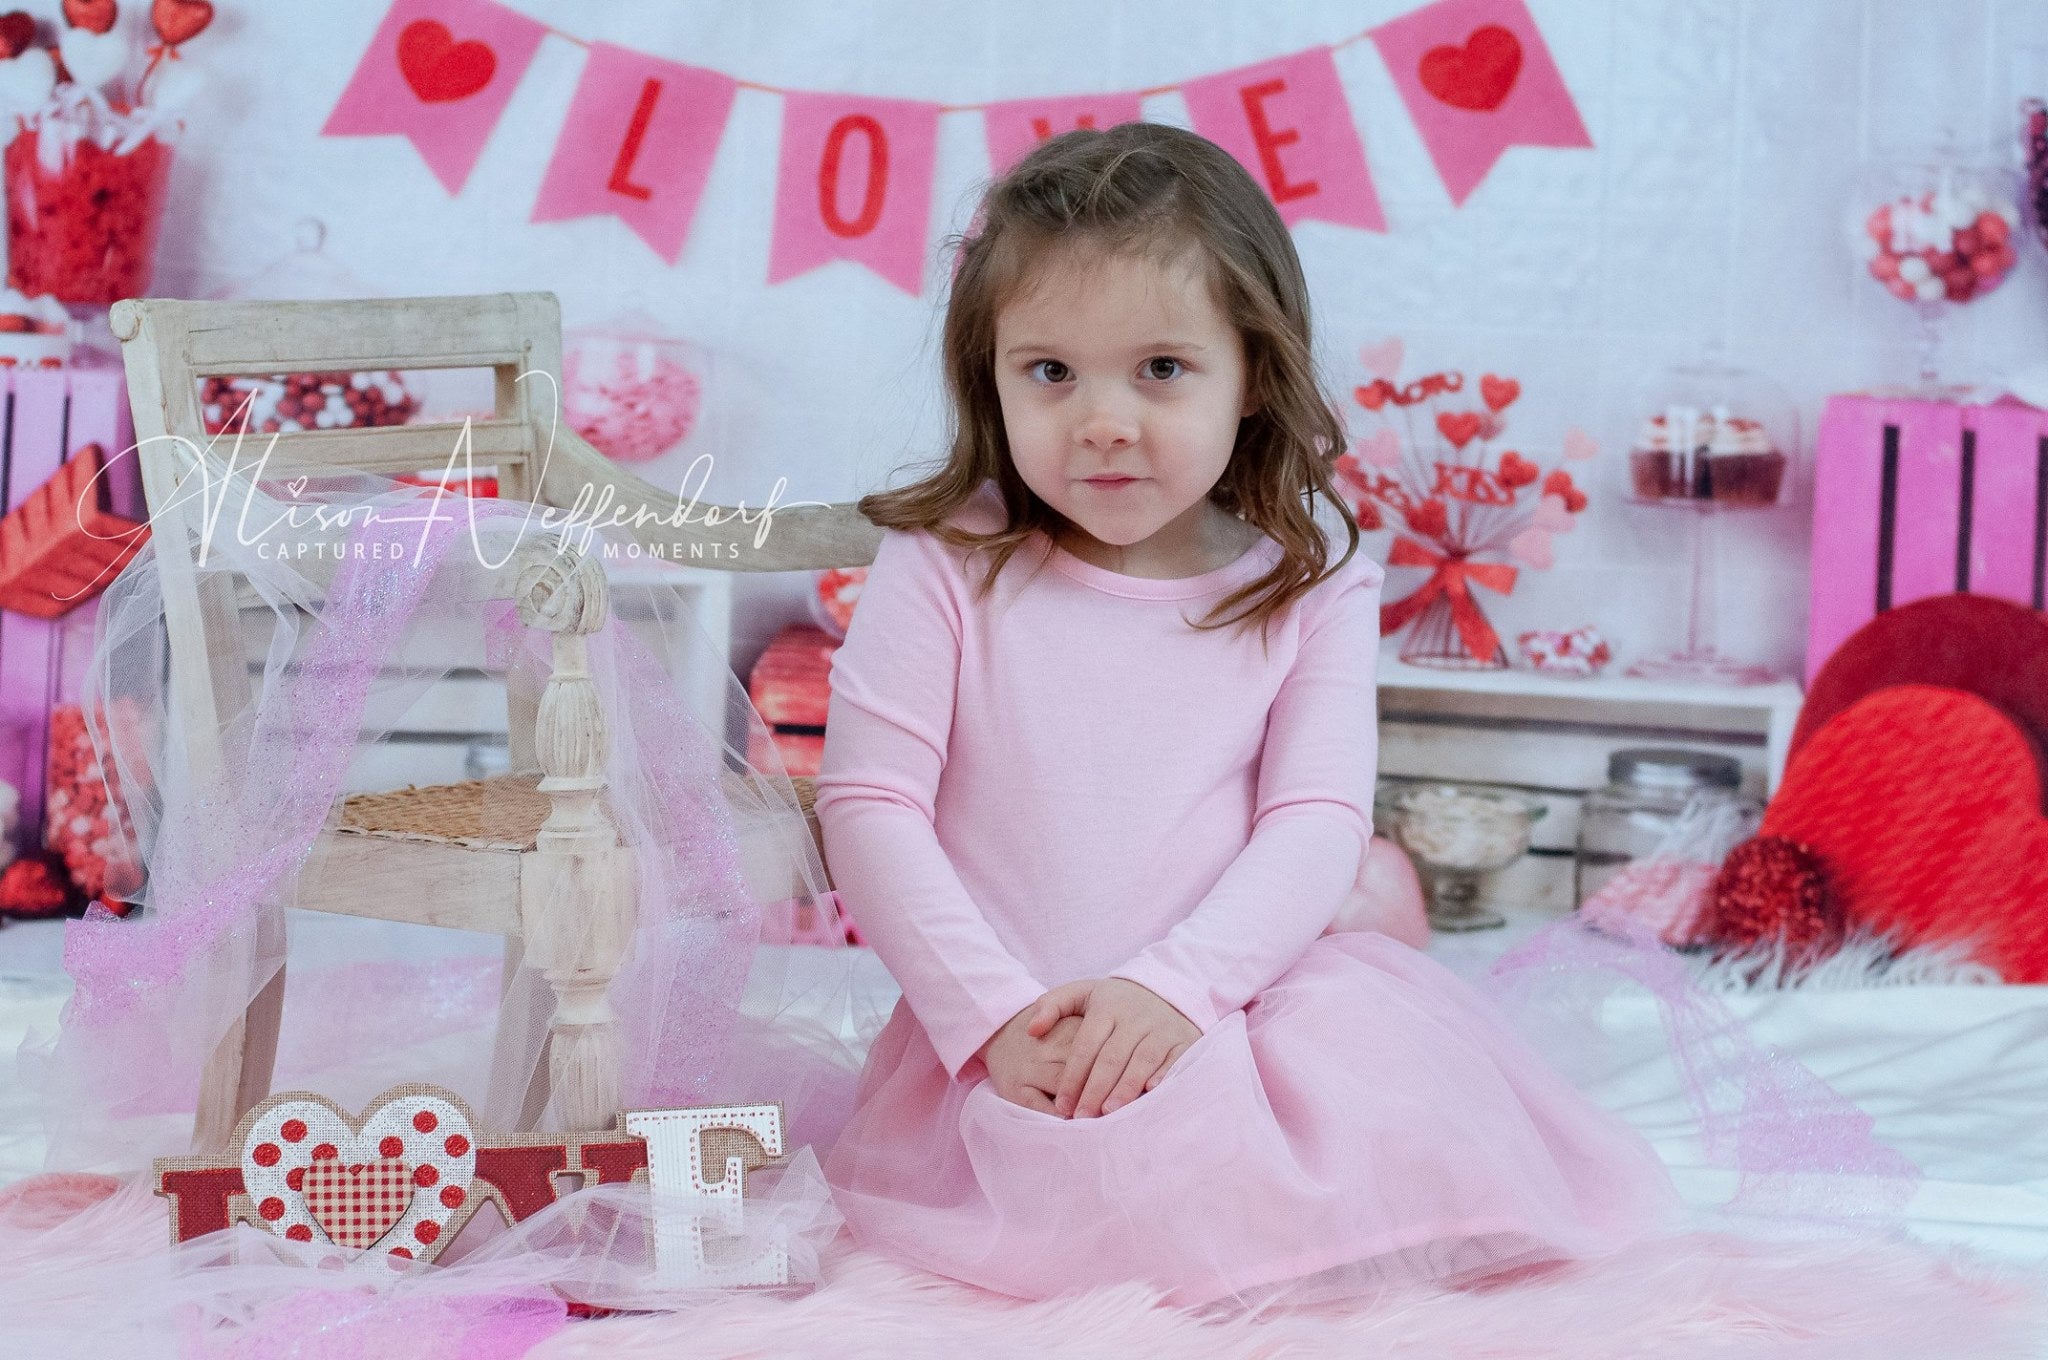 Kate Valentine Sweet Shoppe Backdrop designed by Arica Kirby